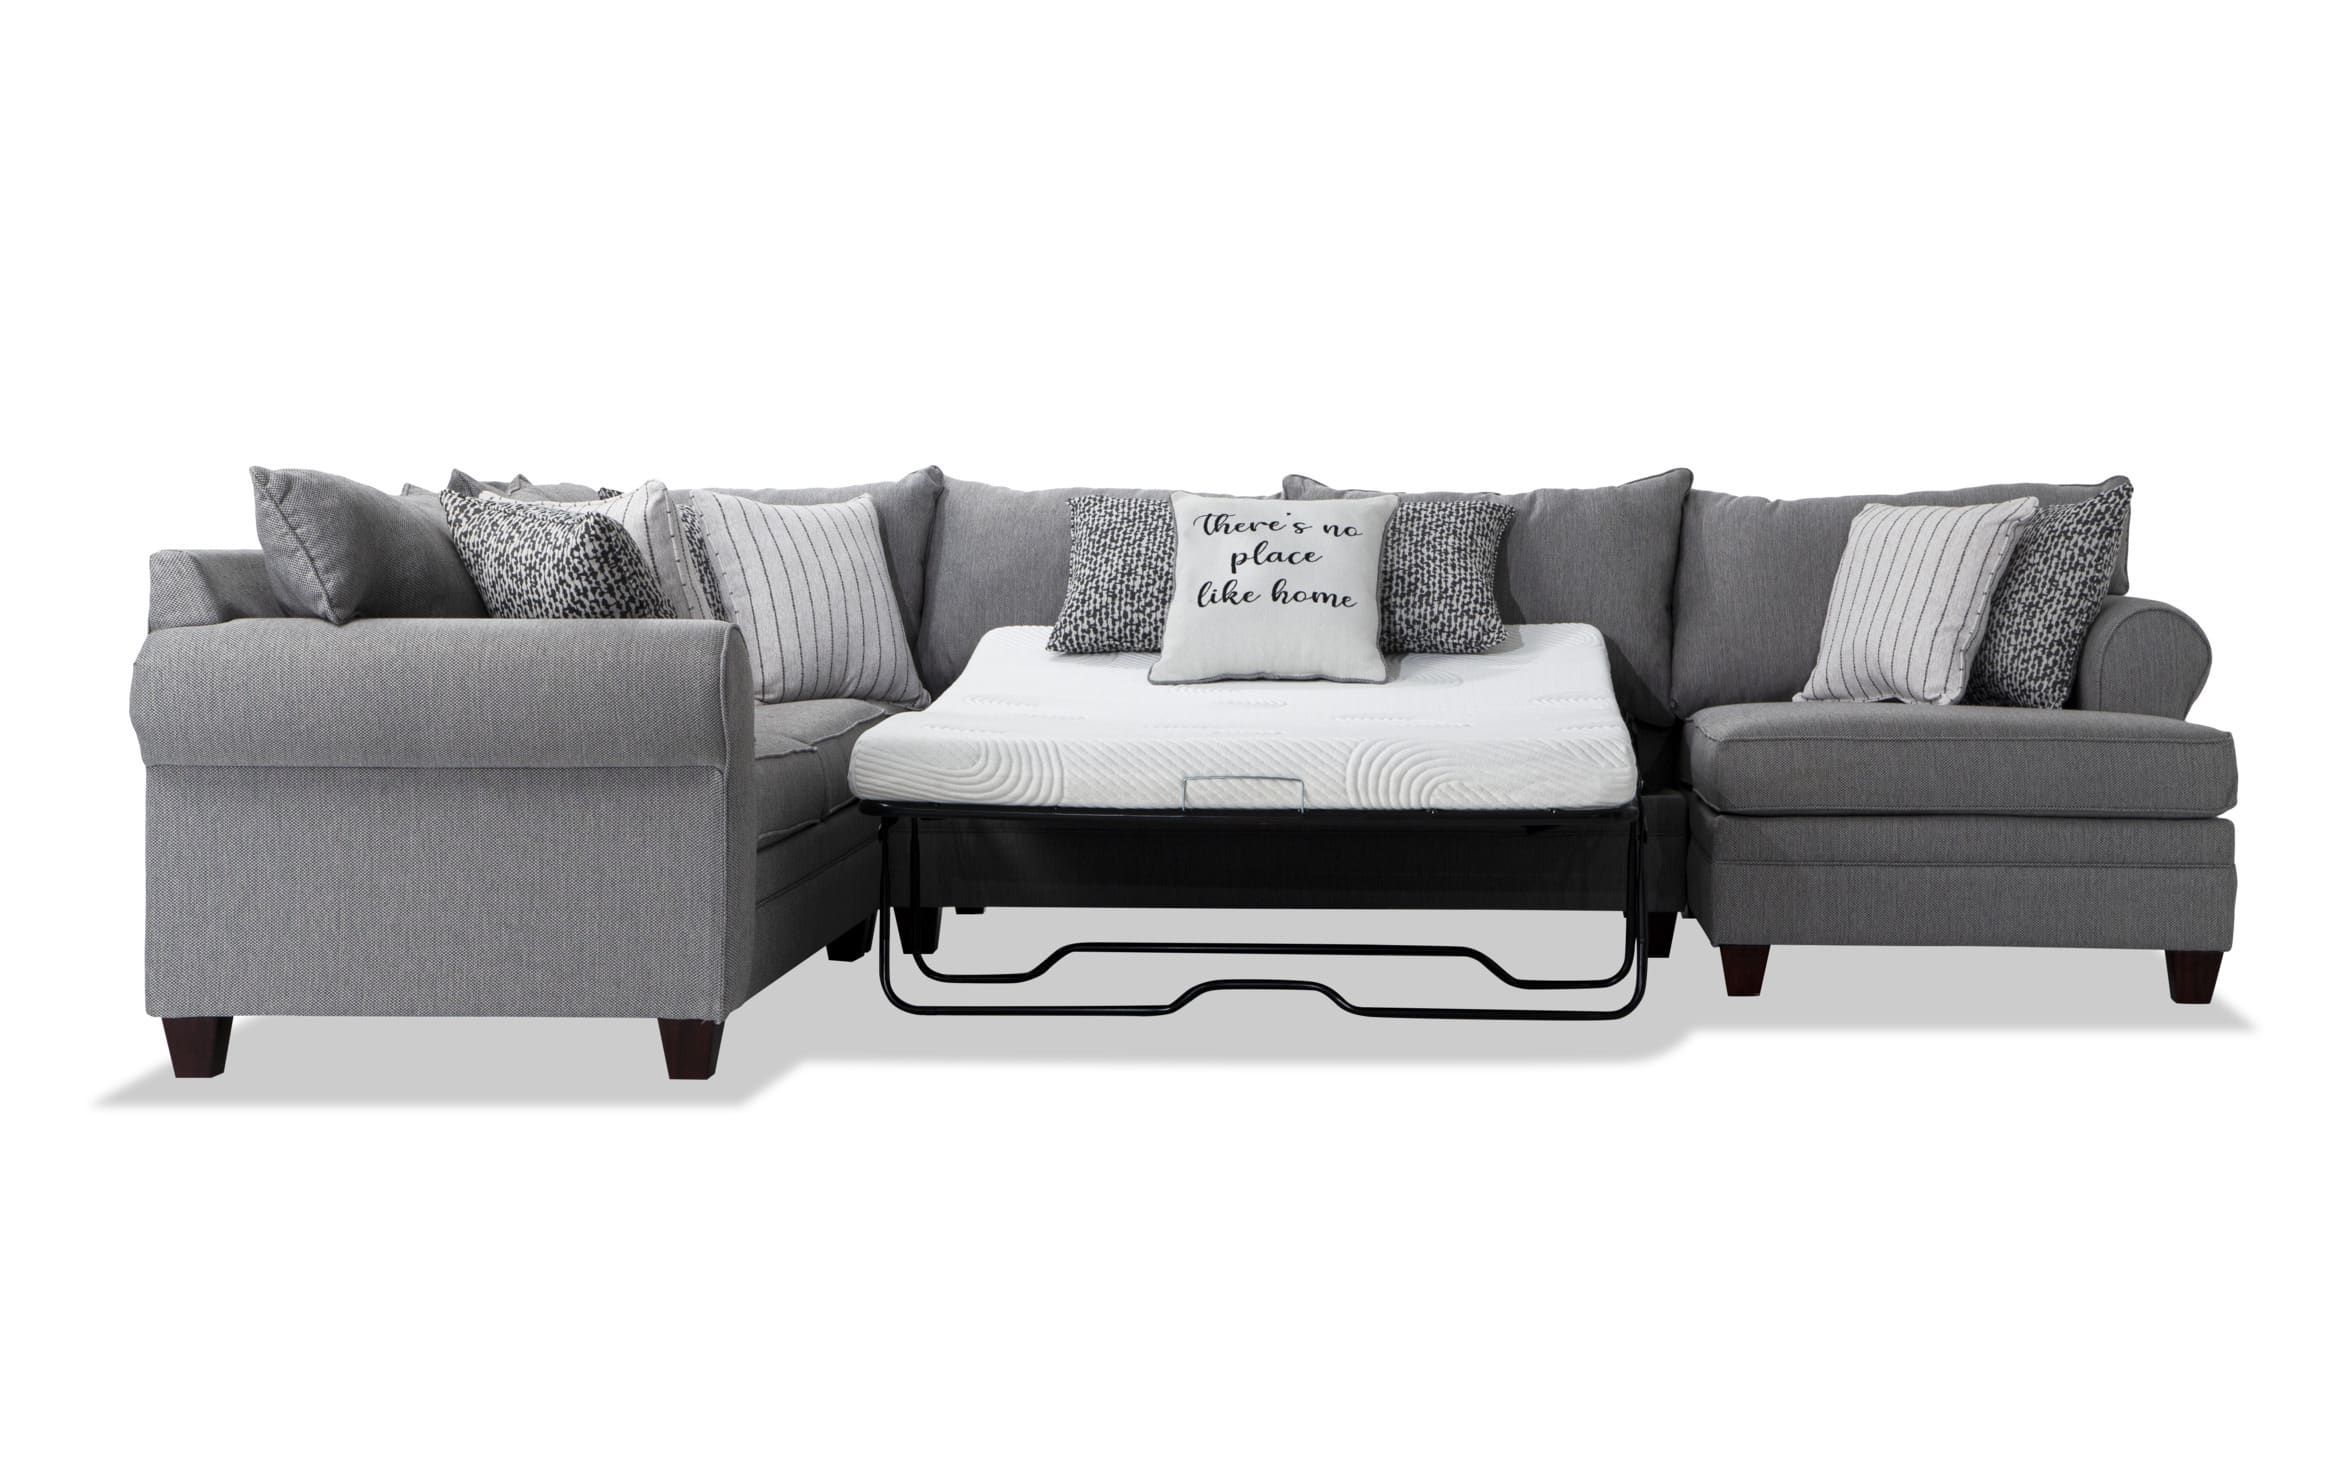 Laurel Gray 4 Piece Bob O Pedic Left Arm Facing Sleeper Sectional For Left Or Right Facing Sleeper Sectionals (View 7 of 21)